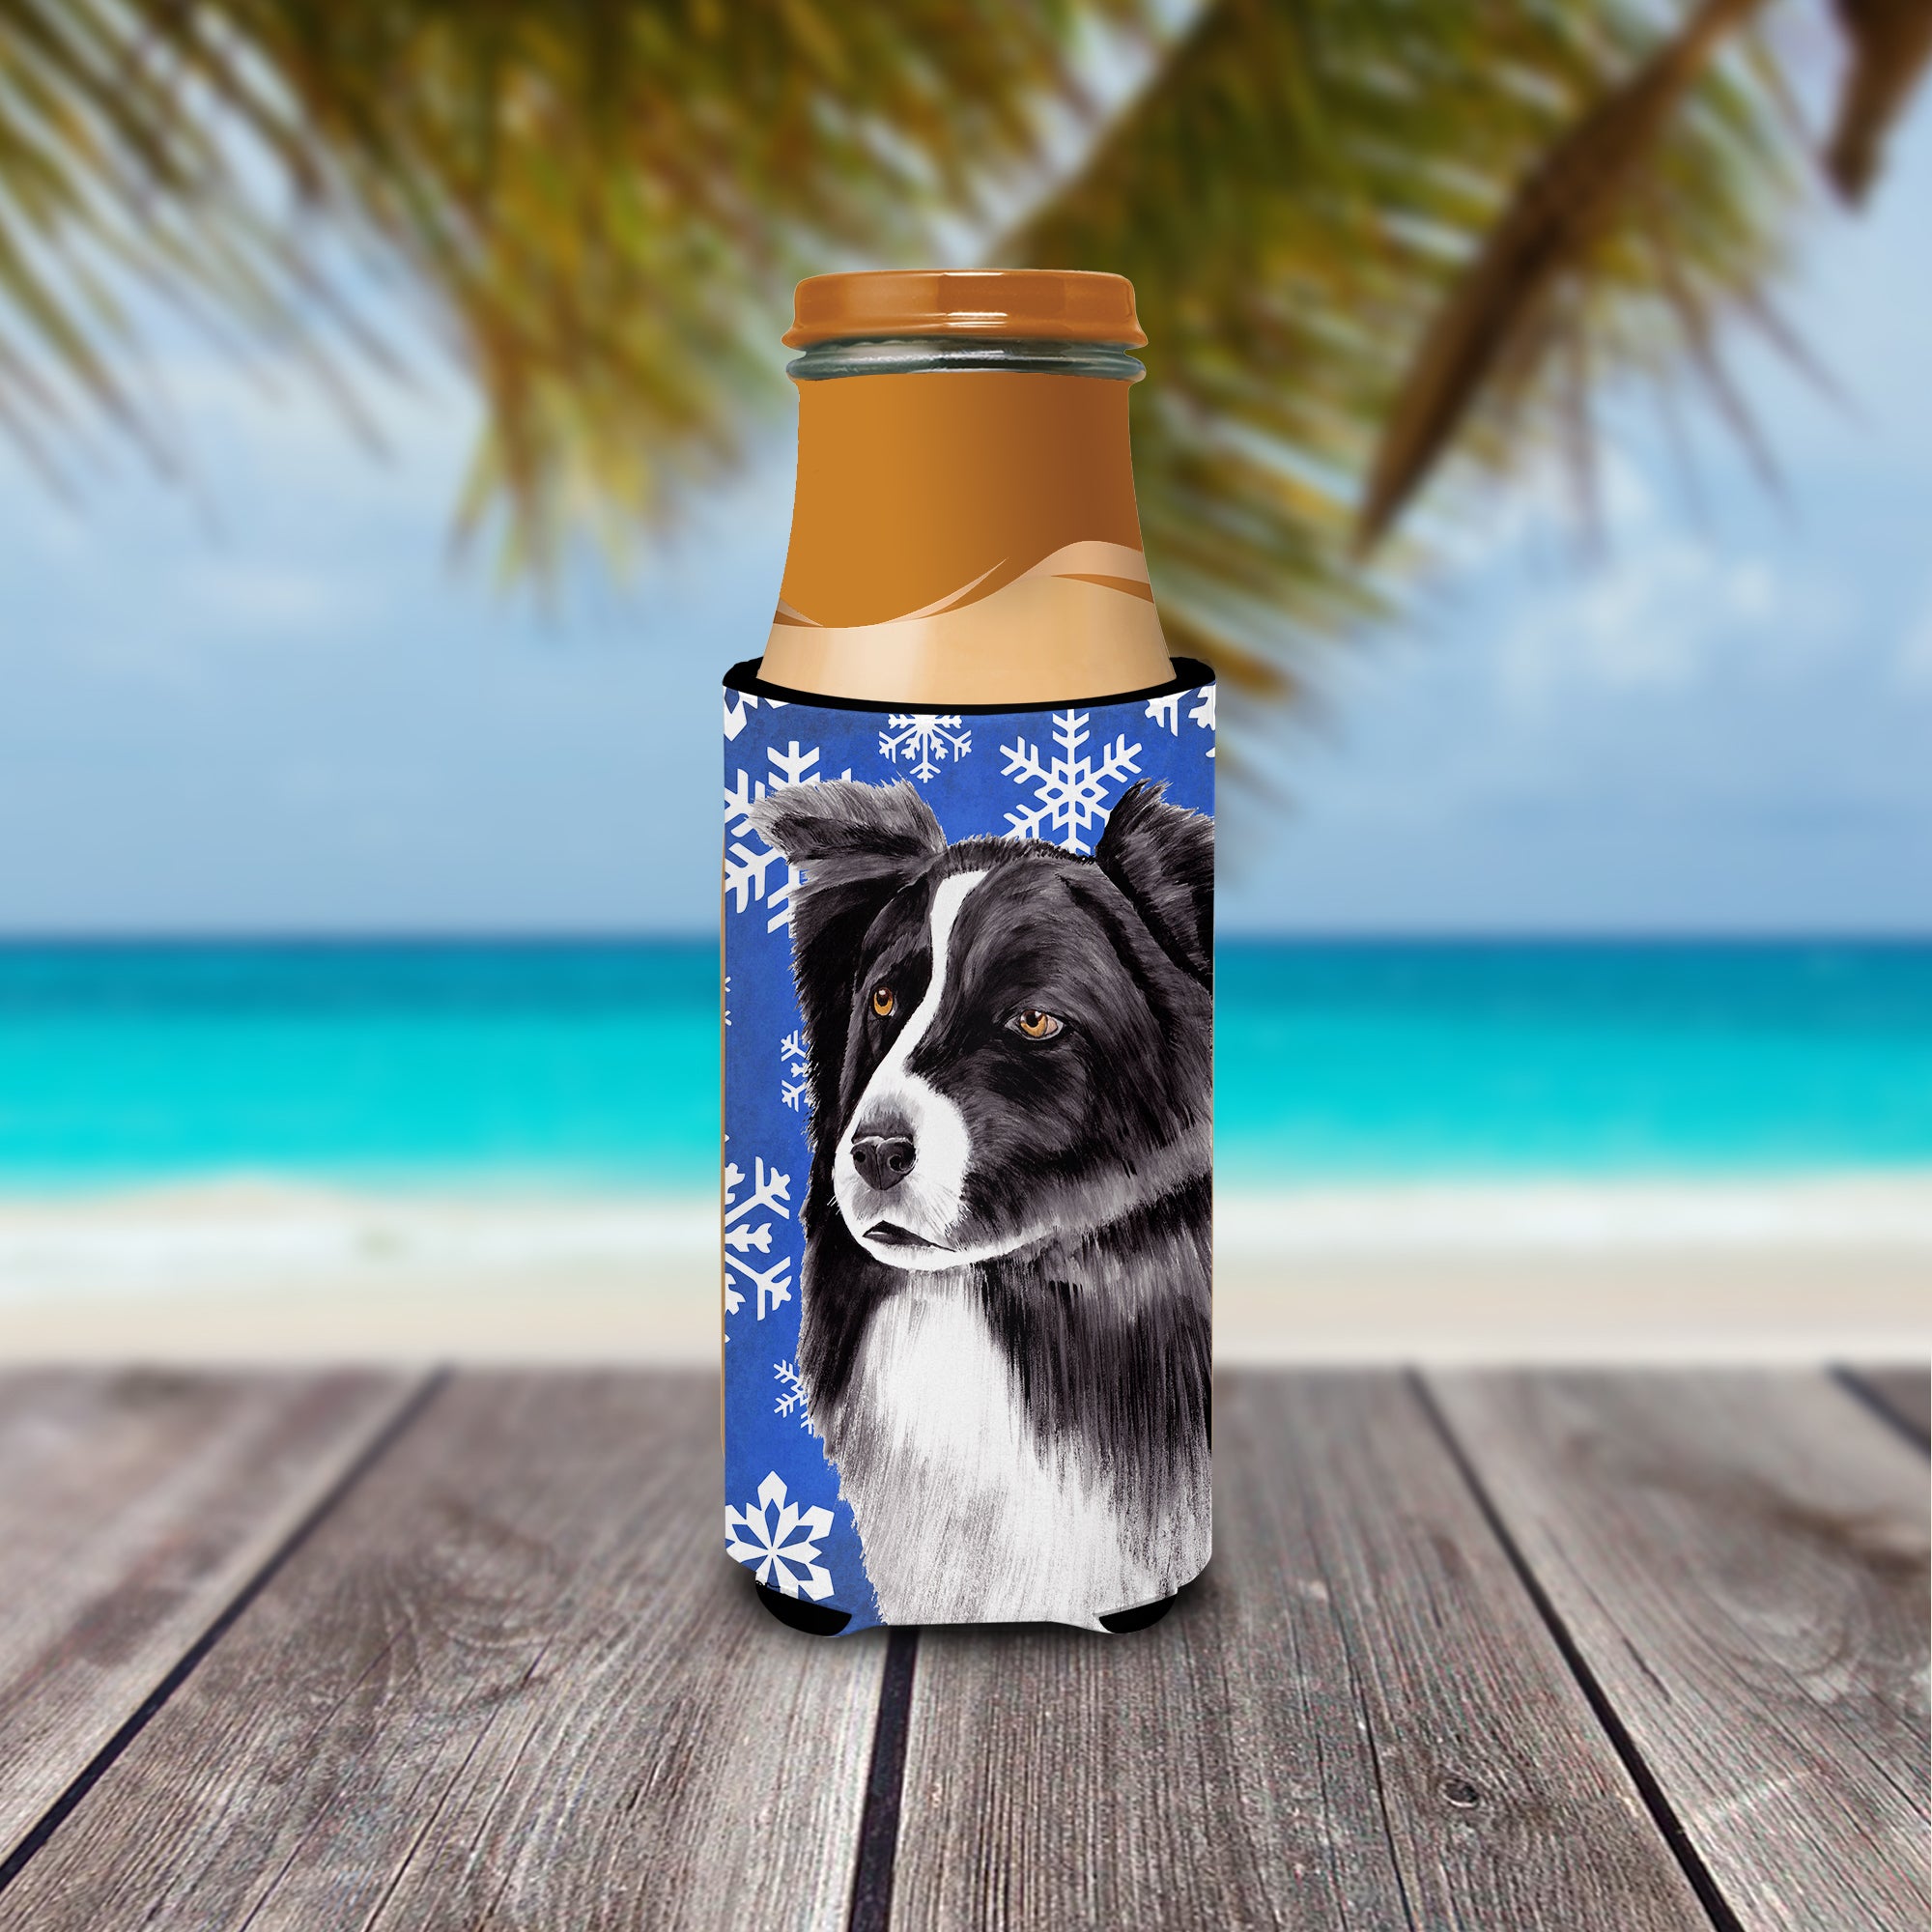 Border Collie Winter Snowflakes Holiday Ultra Beverage Insulators for slim cans SC9367MUK.